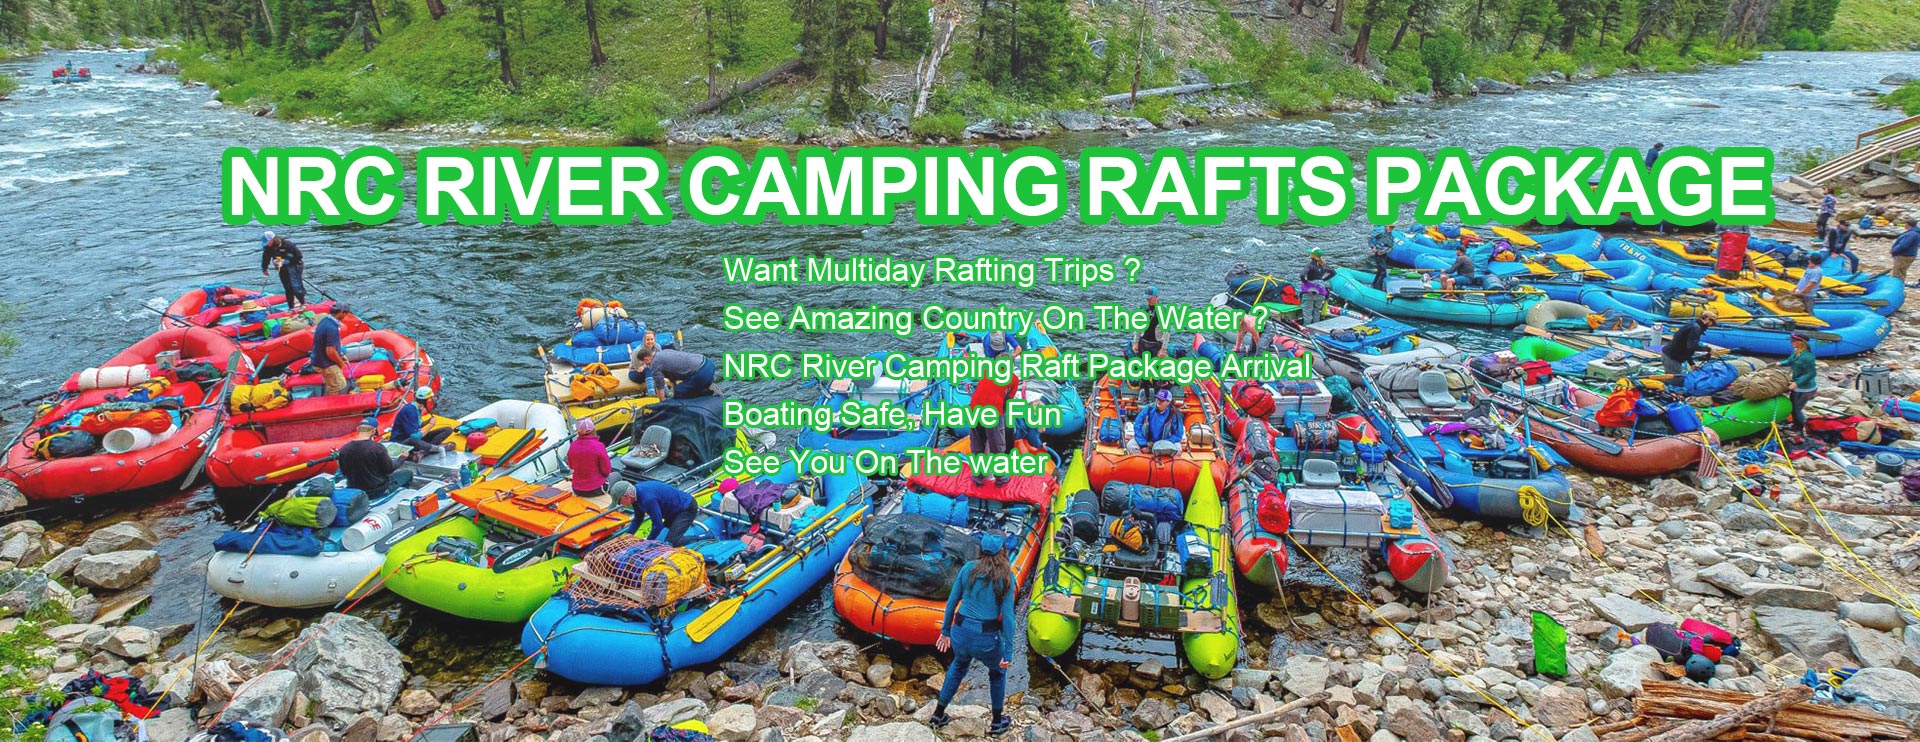 RIVER RAFTS CAMPING PACKAGE